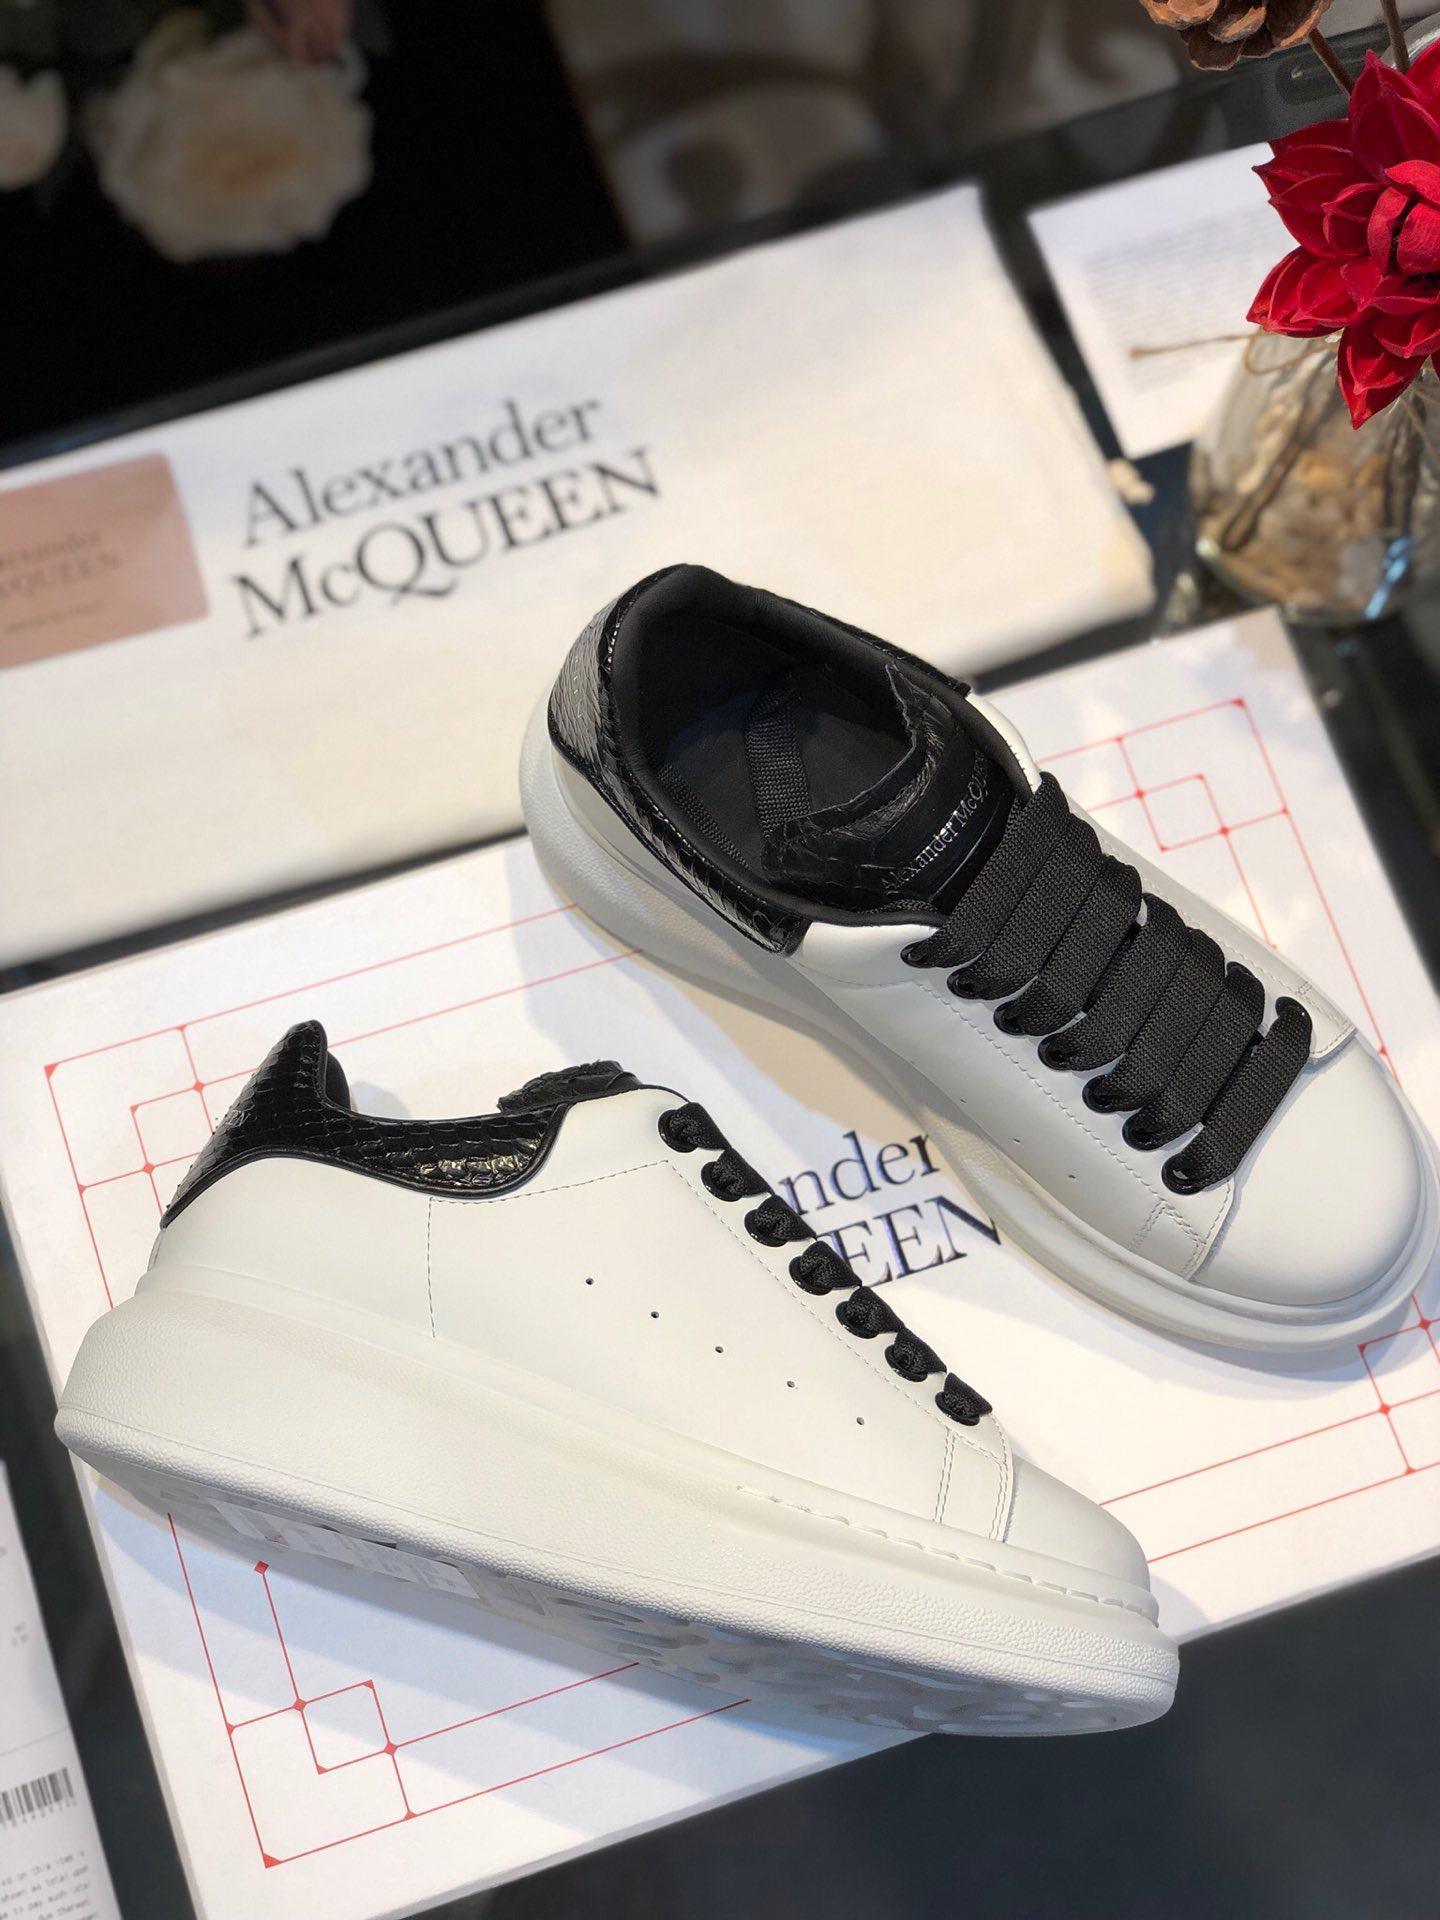 Alexander McQueen Fahion Sneakers White and black snake heel with black tongue  MS100012